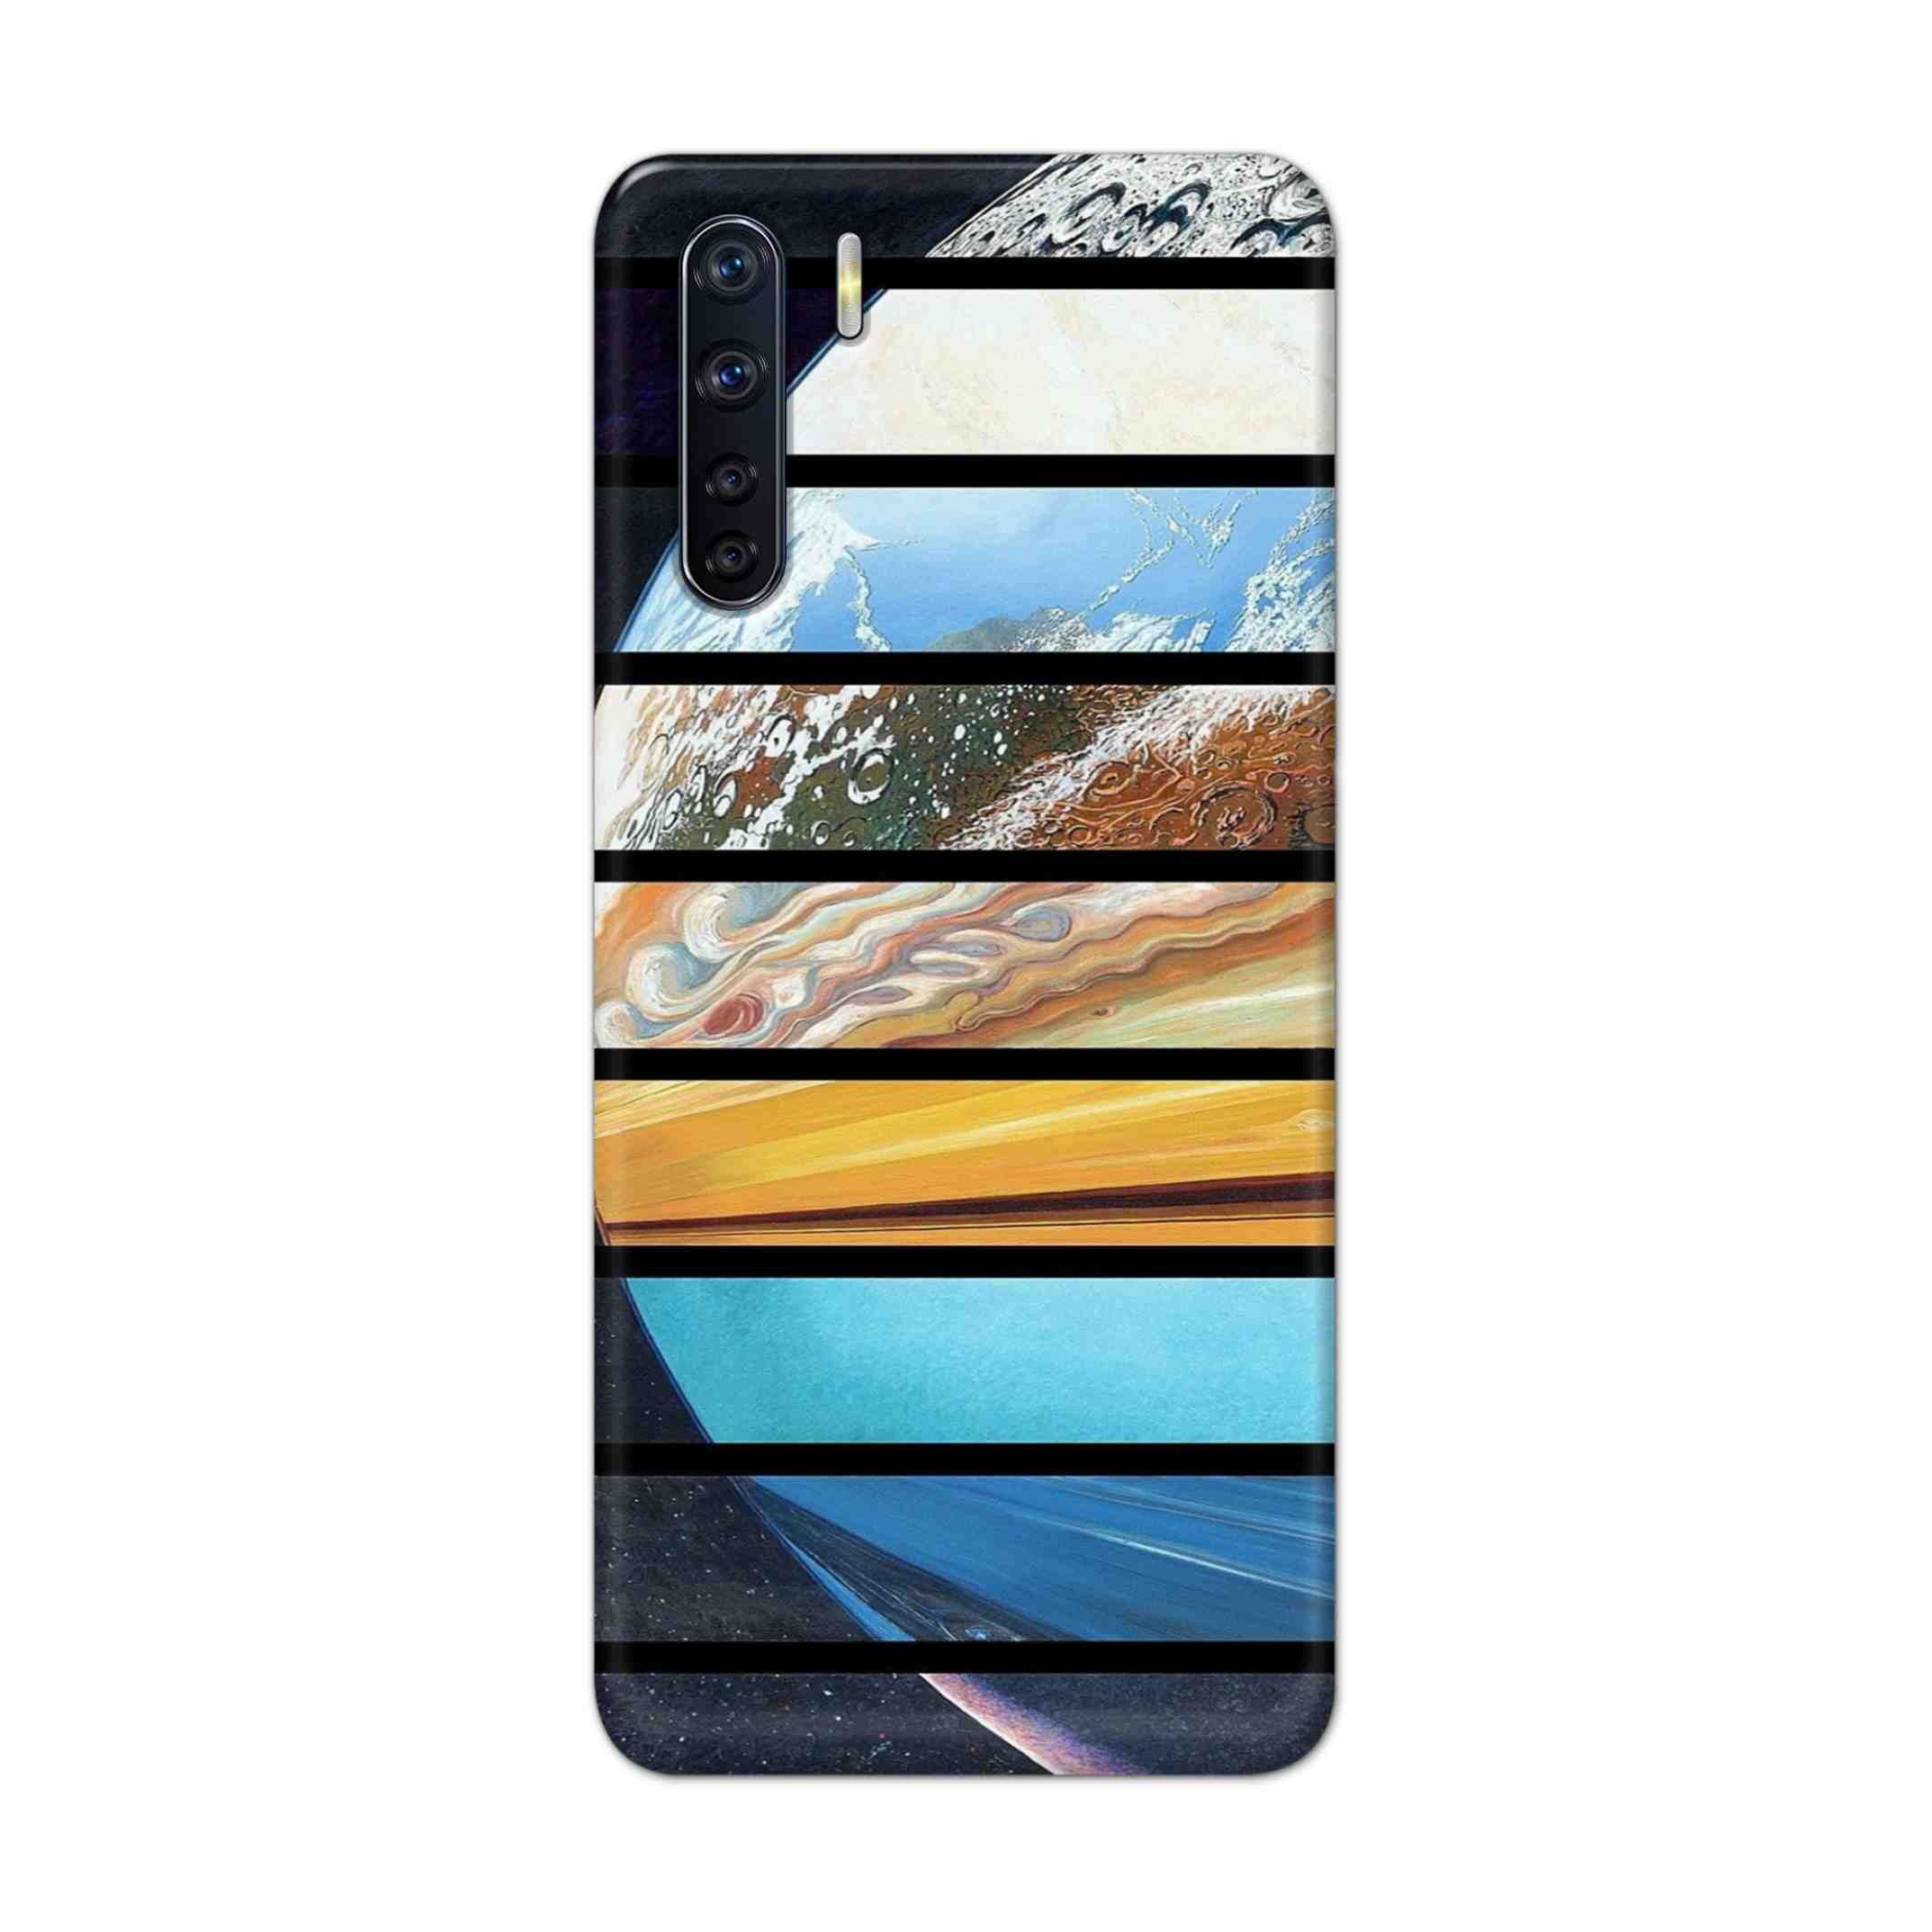 Buy Colourful Earth Hard Back Mobile Phone Case Cover For OPPO F15 Online